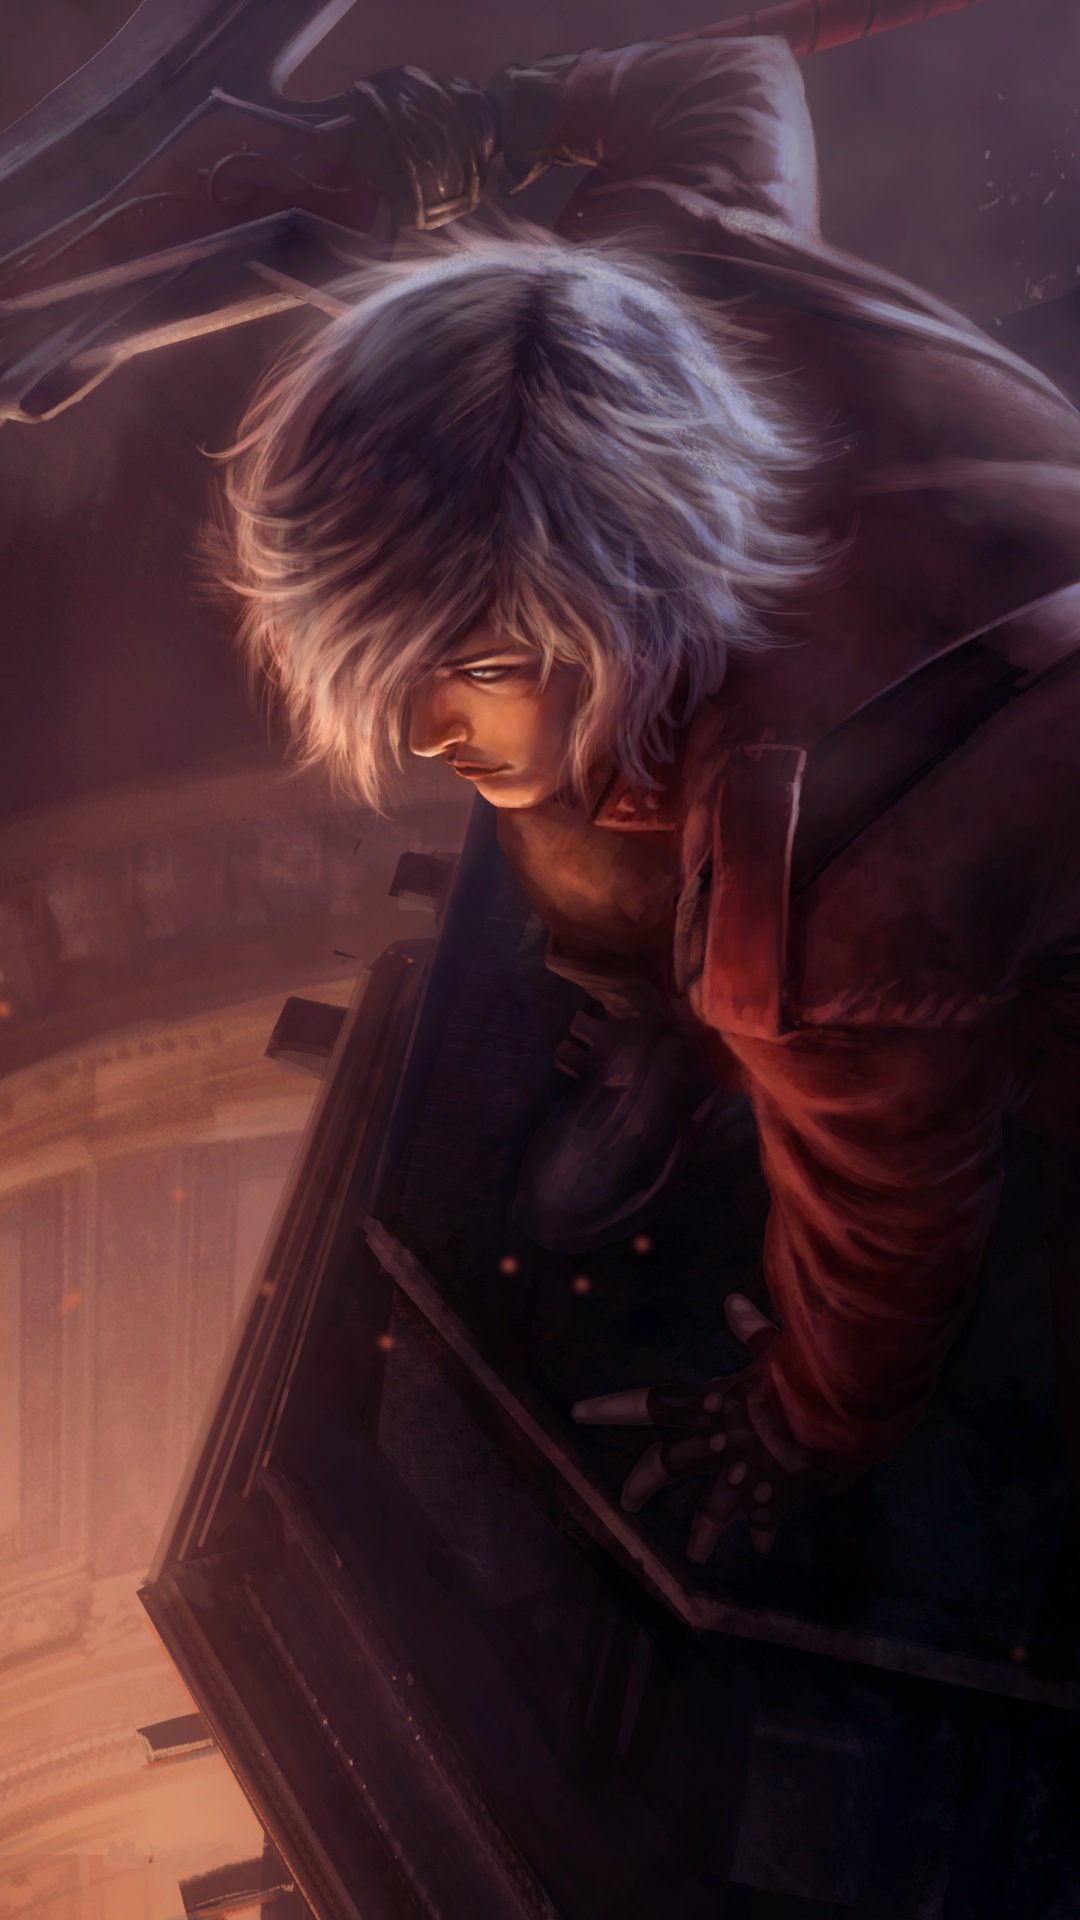 Devil May Cry, Devil May Cry 5, Dmc Devil May Cry, Devil May Cry 4, Dante. Wallpaper in 1080x1920 Resolution